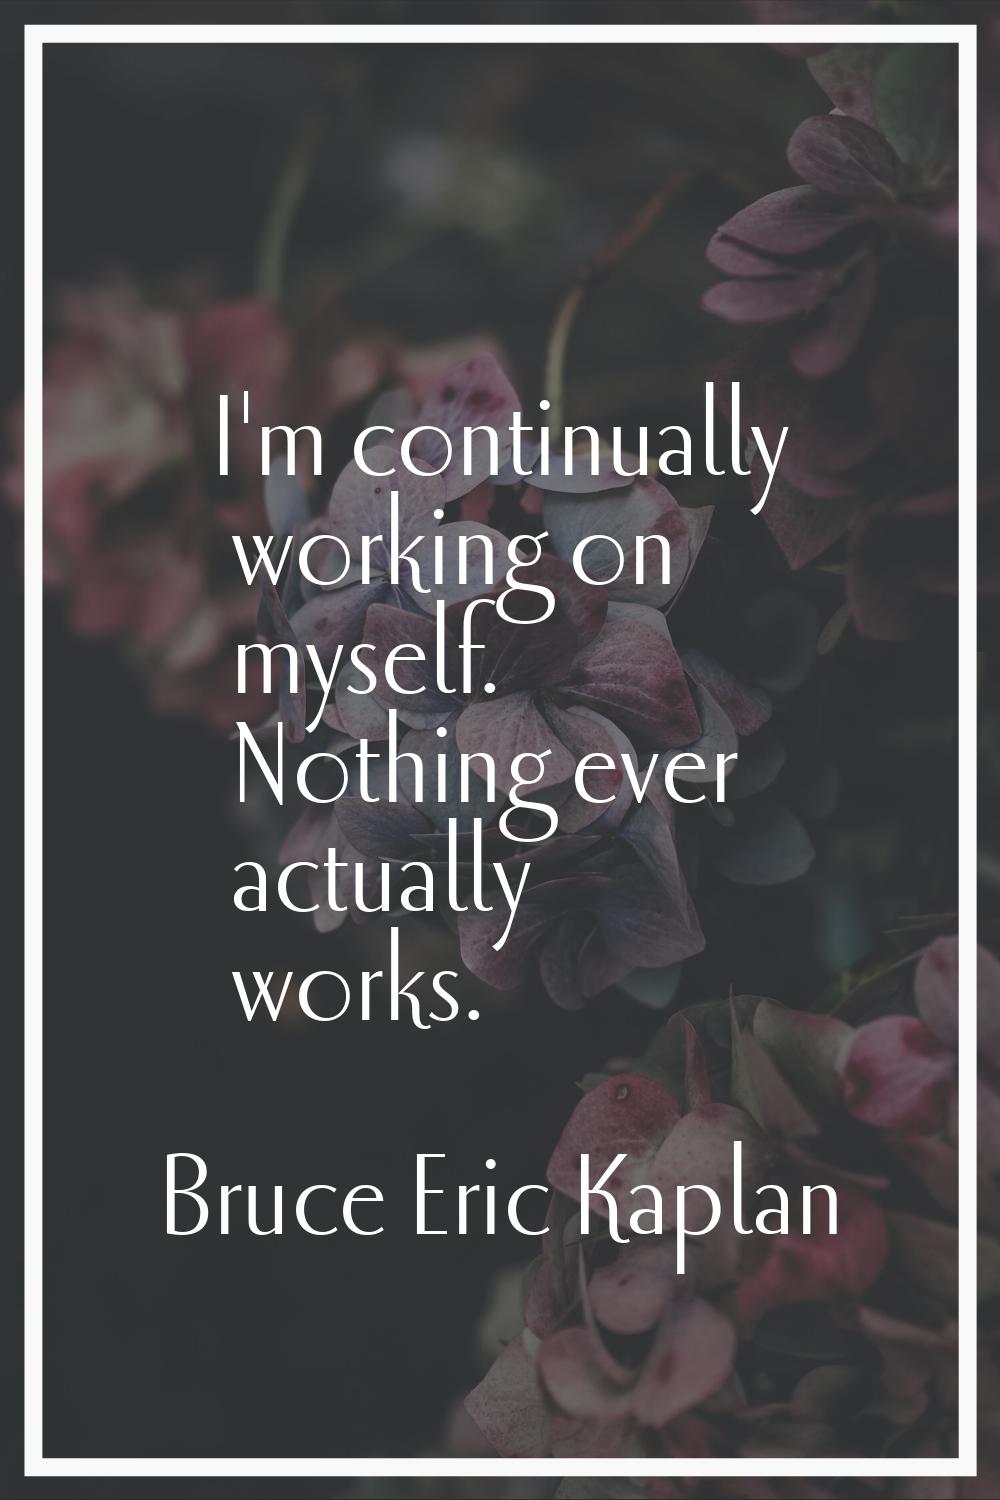 I'm continually working on myself. Nothing ever actually works.